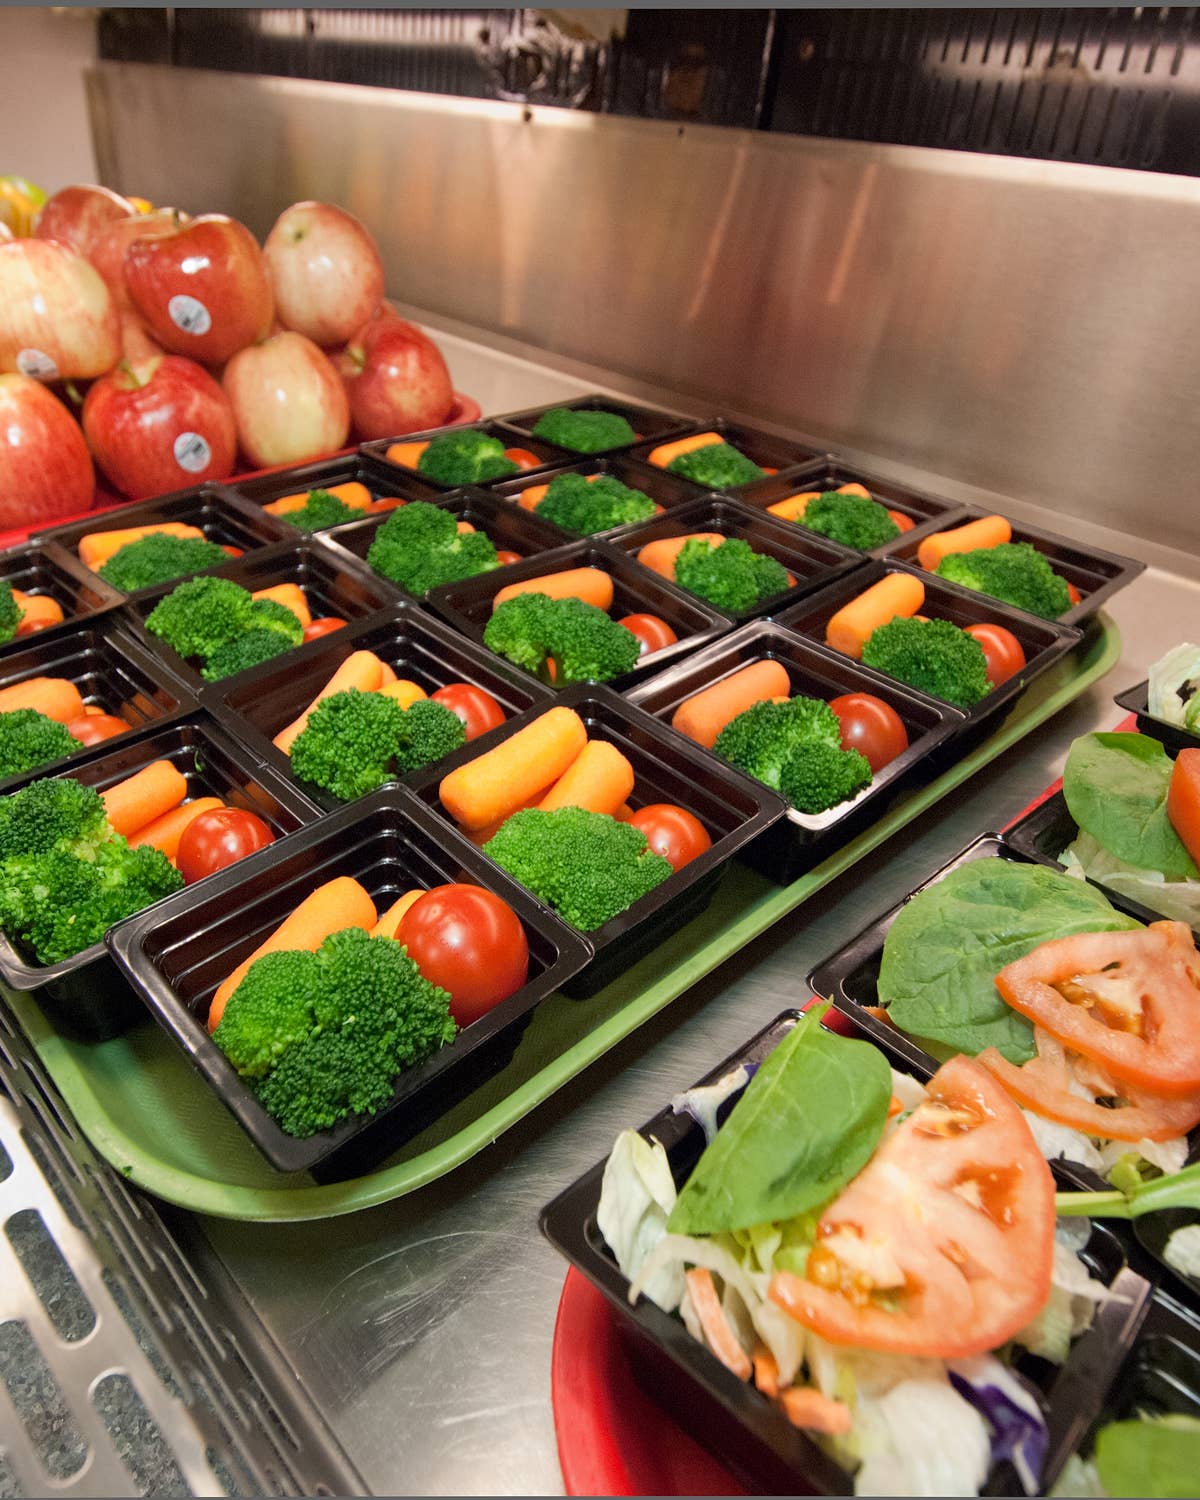 A Brooklyn School Cafeteria Has Gone Completely Vegetarian